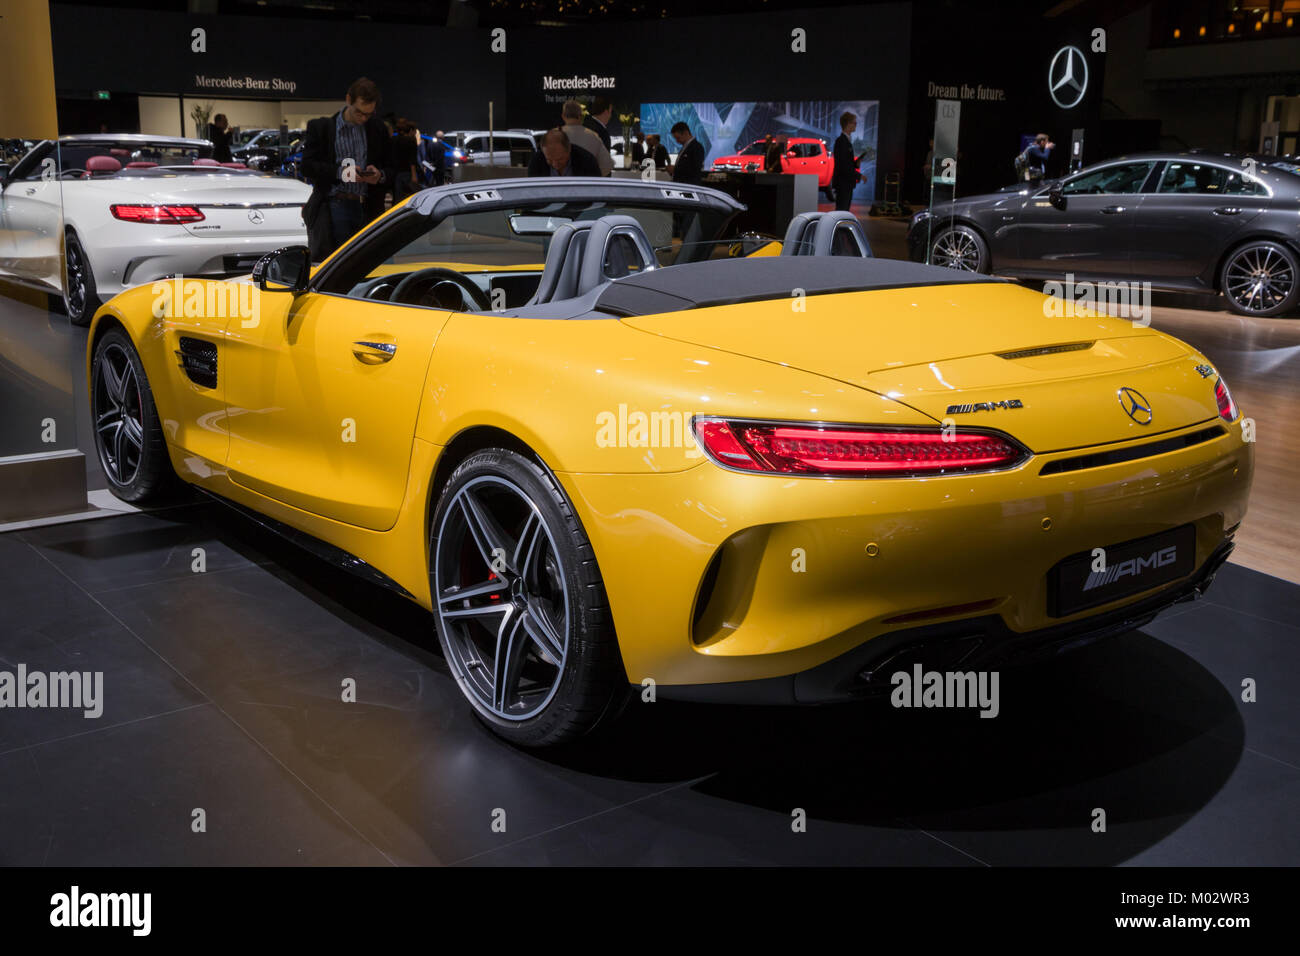 BRUSSELS - JAN 10, 2018: Mercedes AMG SLS GT sports car showcased at the Brussels Motor Show. Stock Photo